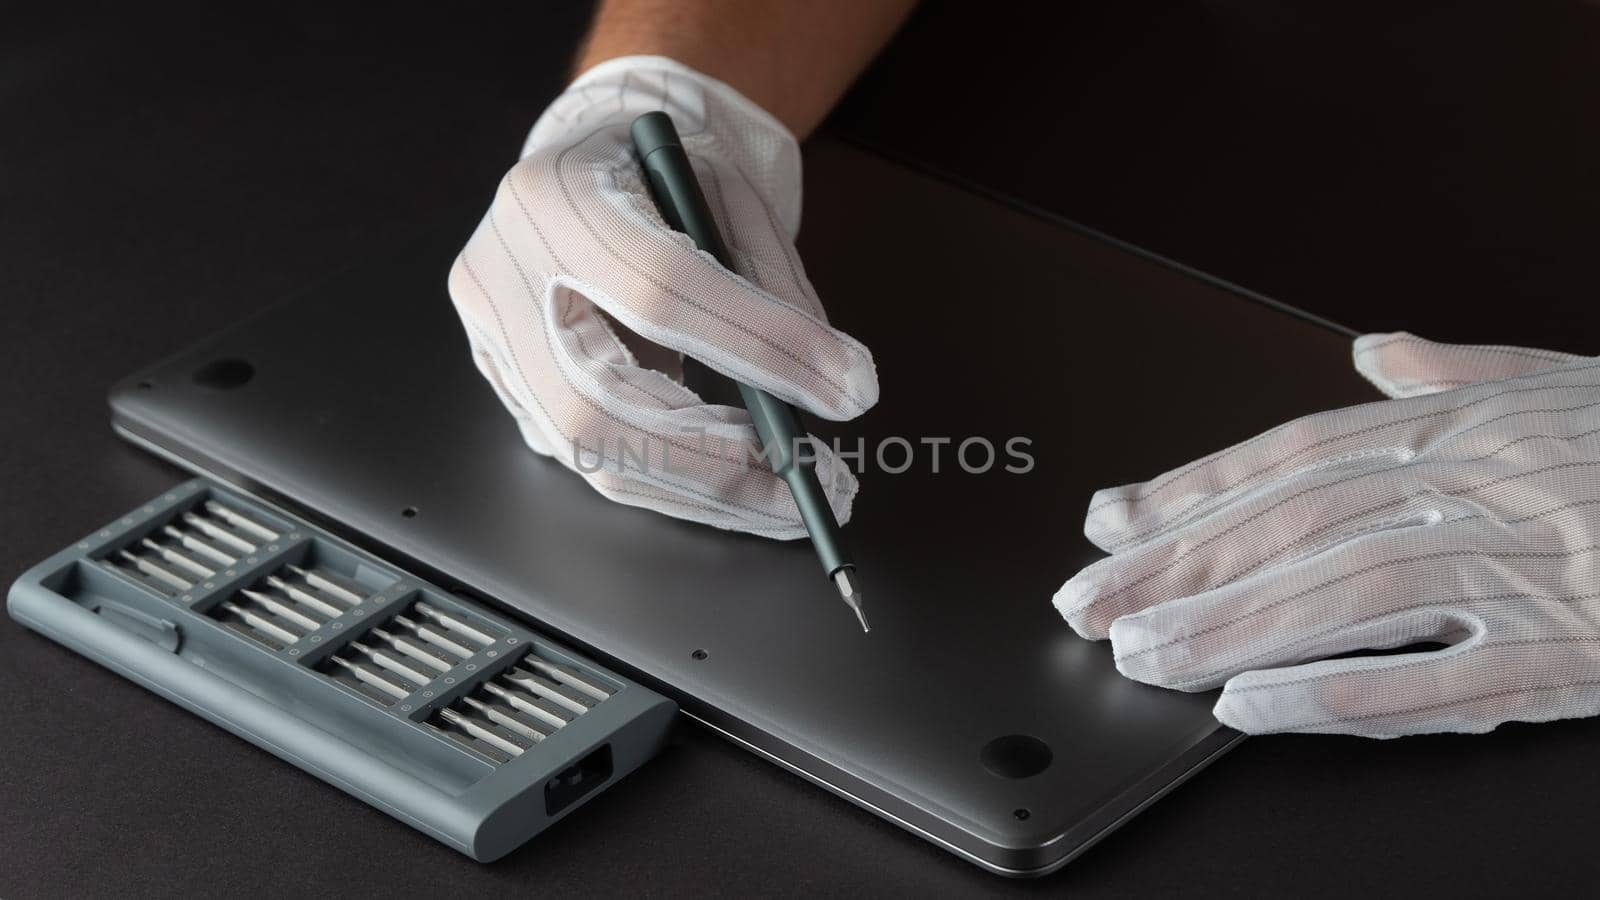 The master repairs a laptop in white gloves with a screwdriver and a set of bits. High quality photo